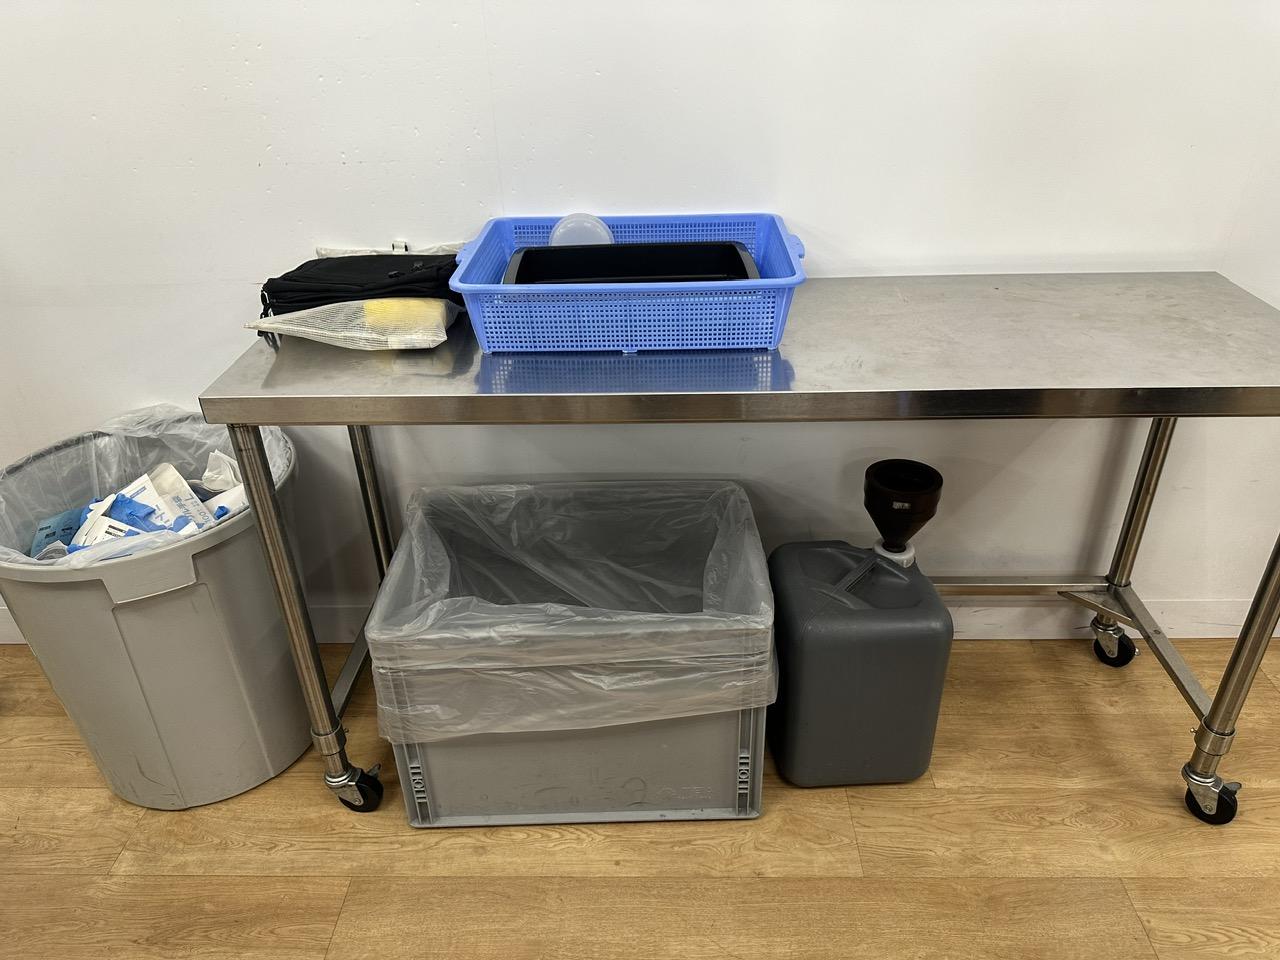 A metal table with a cart and binsDescription automatically generated